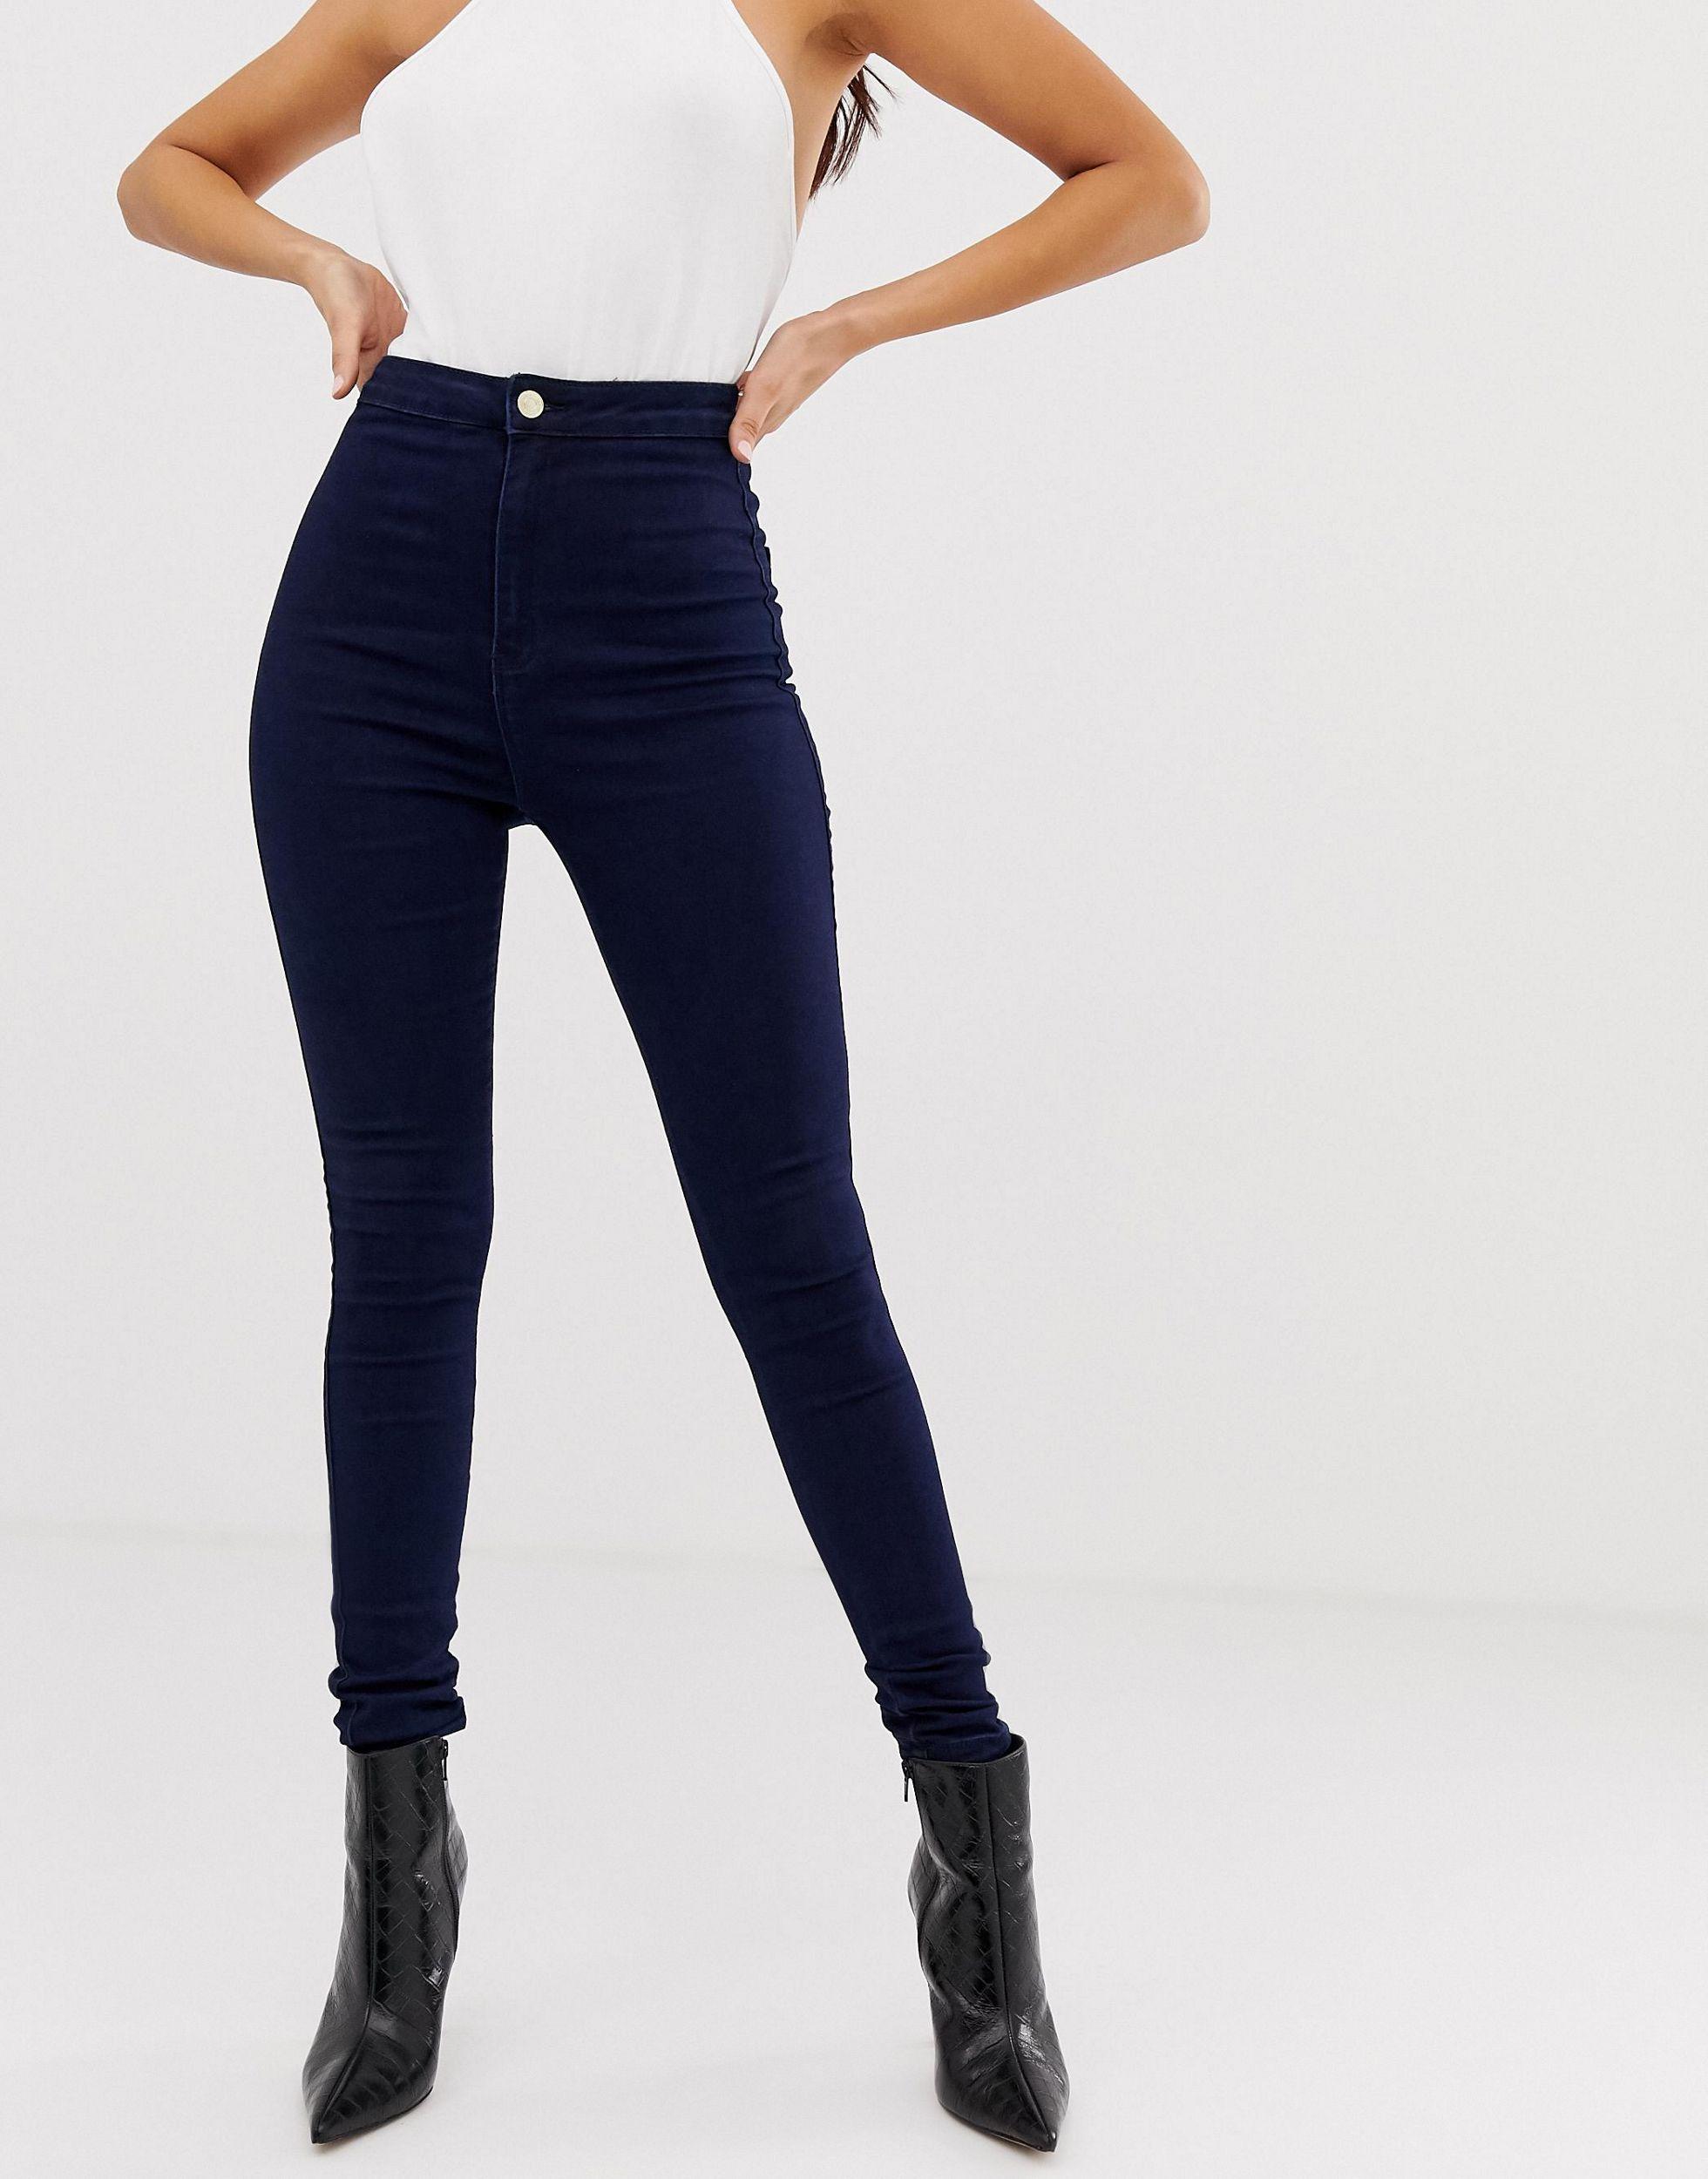 Missguided Denim Vice High Waisted Super Stretch Skinny Jean in Navy ...